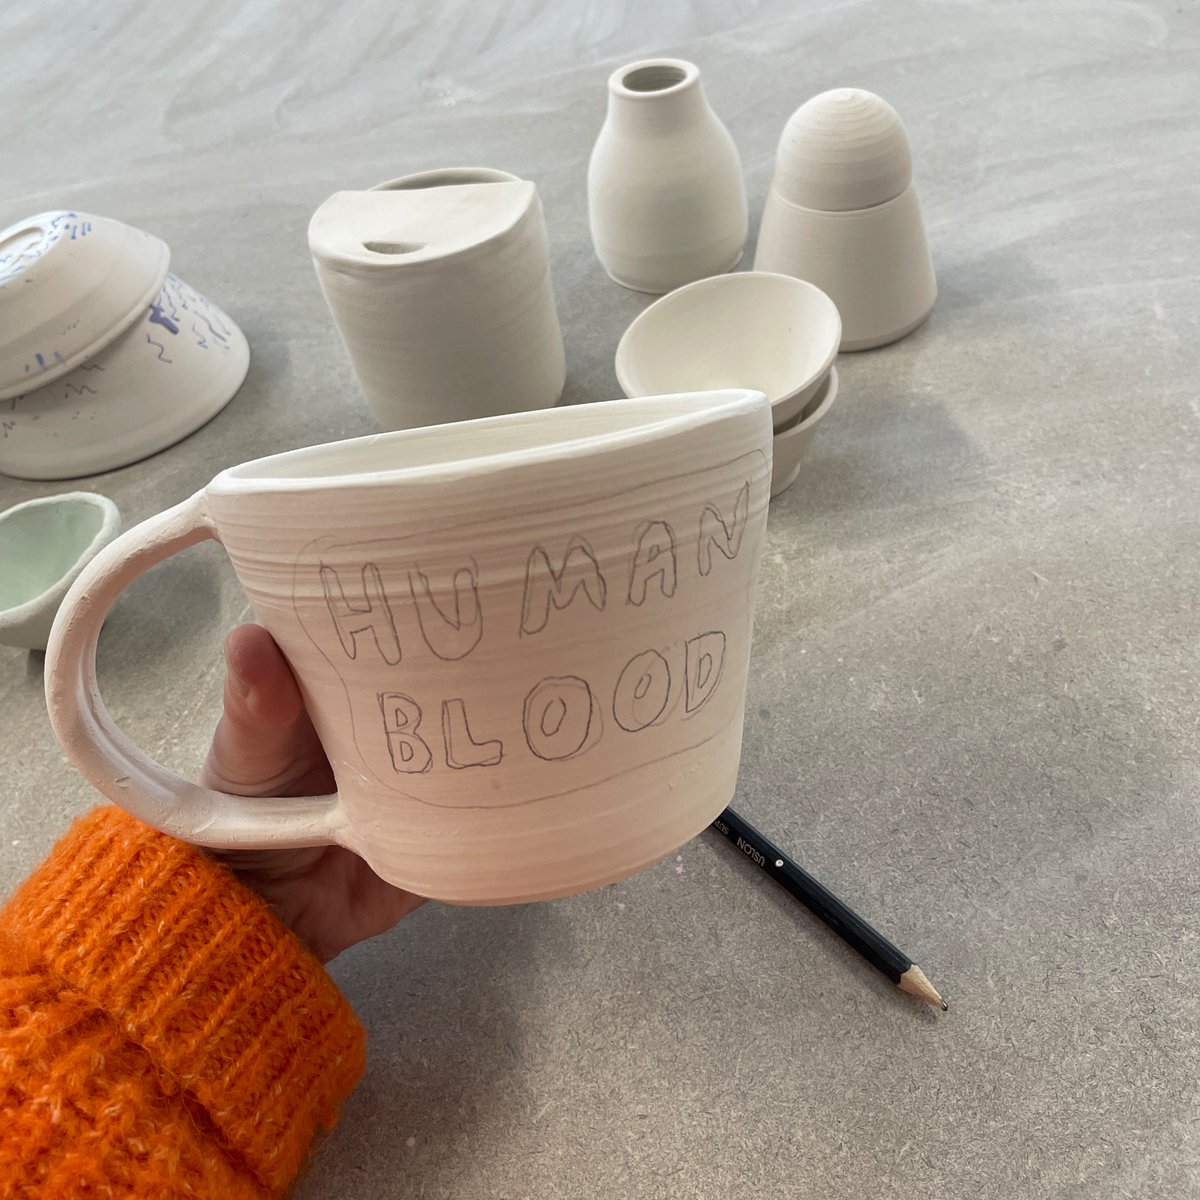 My first time making something that is just for me - and it’s a HUGE mug that will say “HUMAN BLOOD” on it (making a matching carry cup too). Question is: should there be a bat on it?